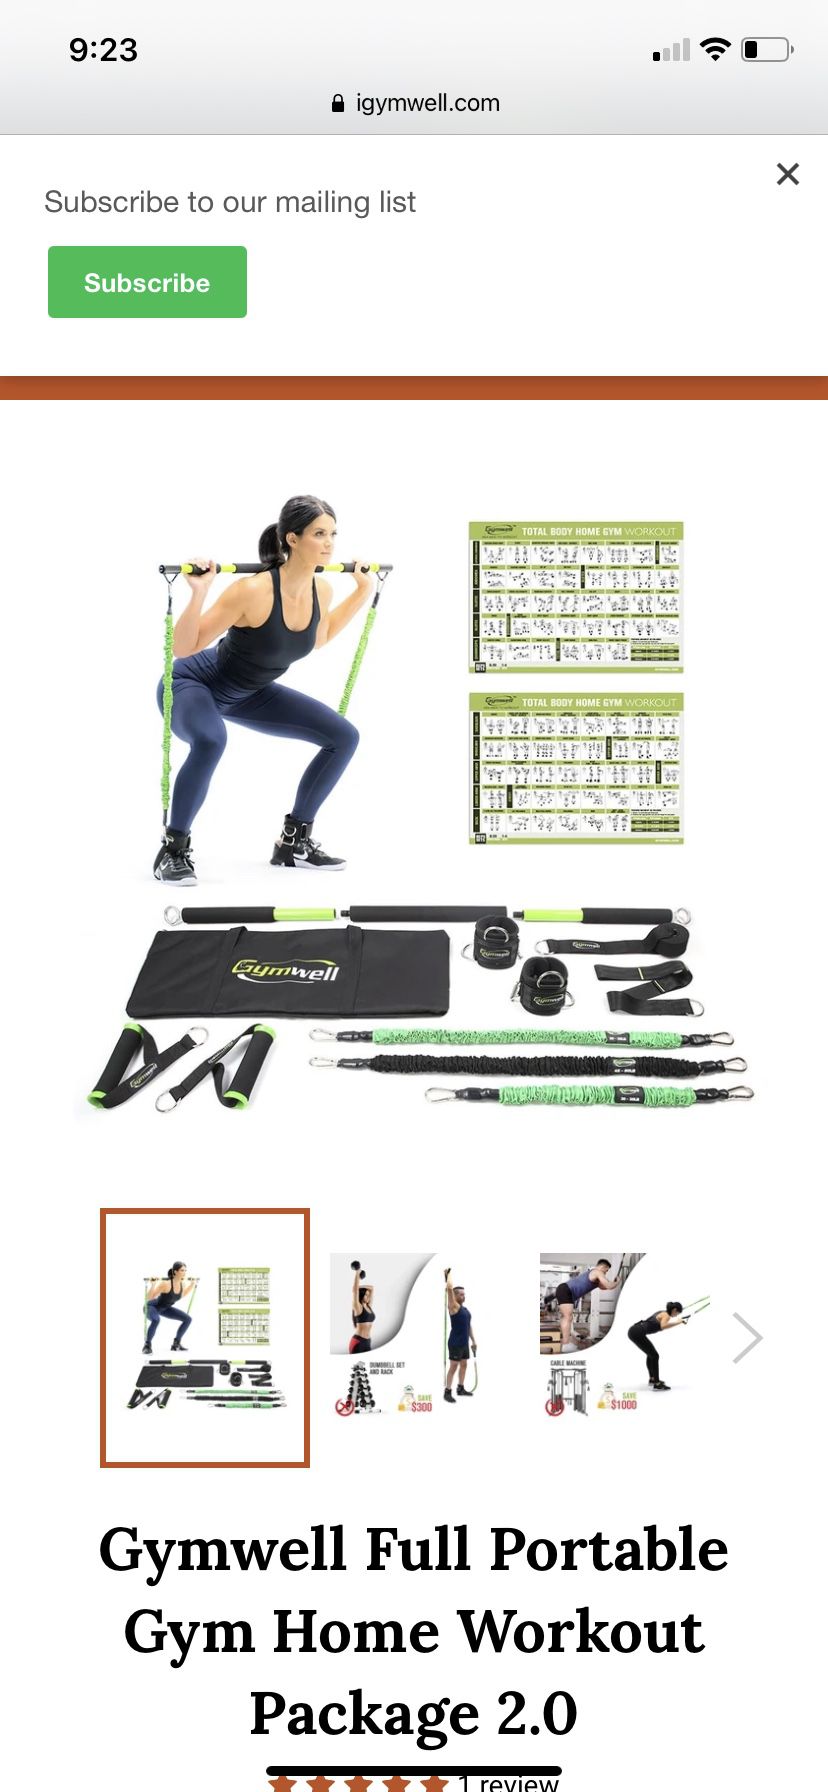 Gymwell Full Portable Gym Home Workout Package 2.0